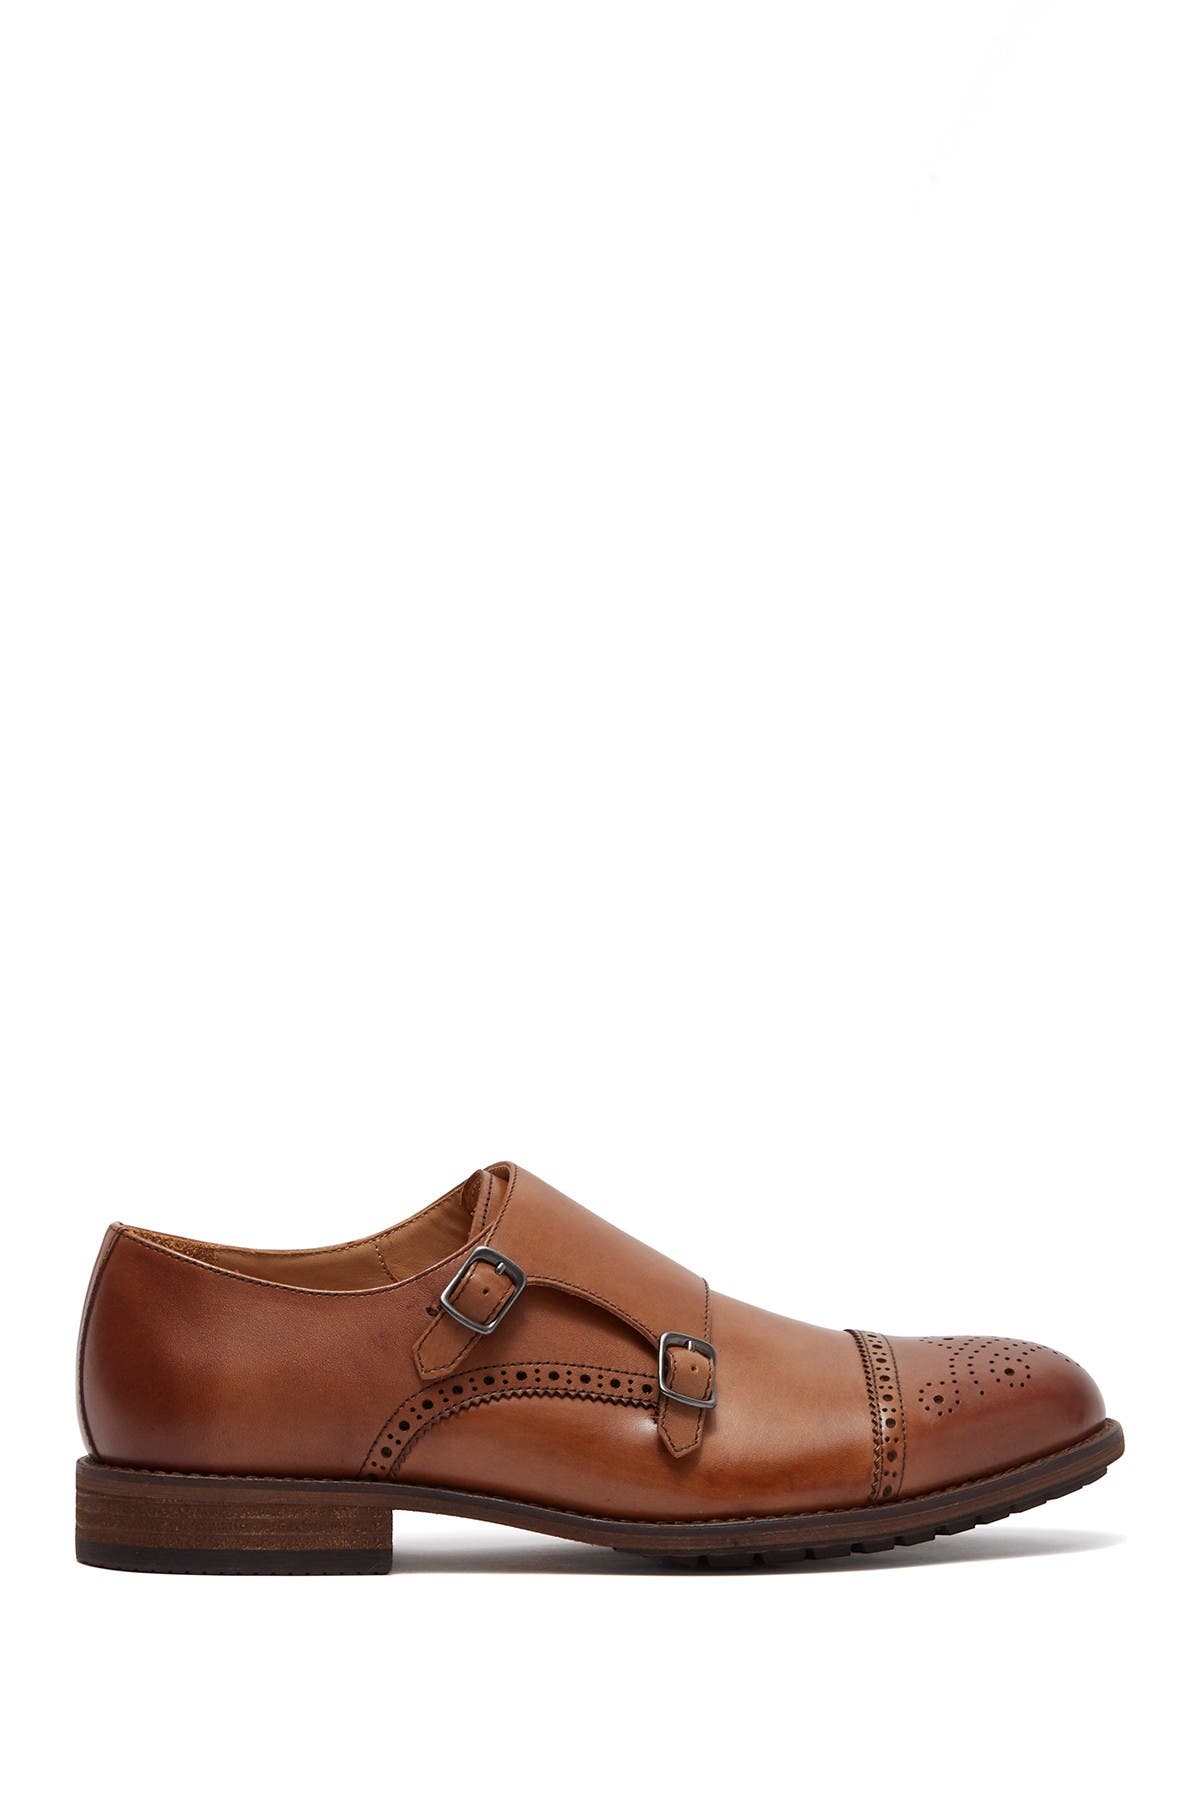 warfield and grand monk strap